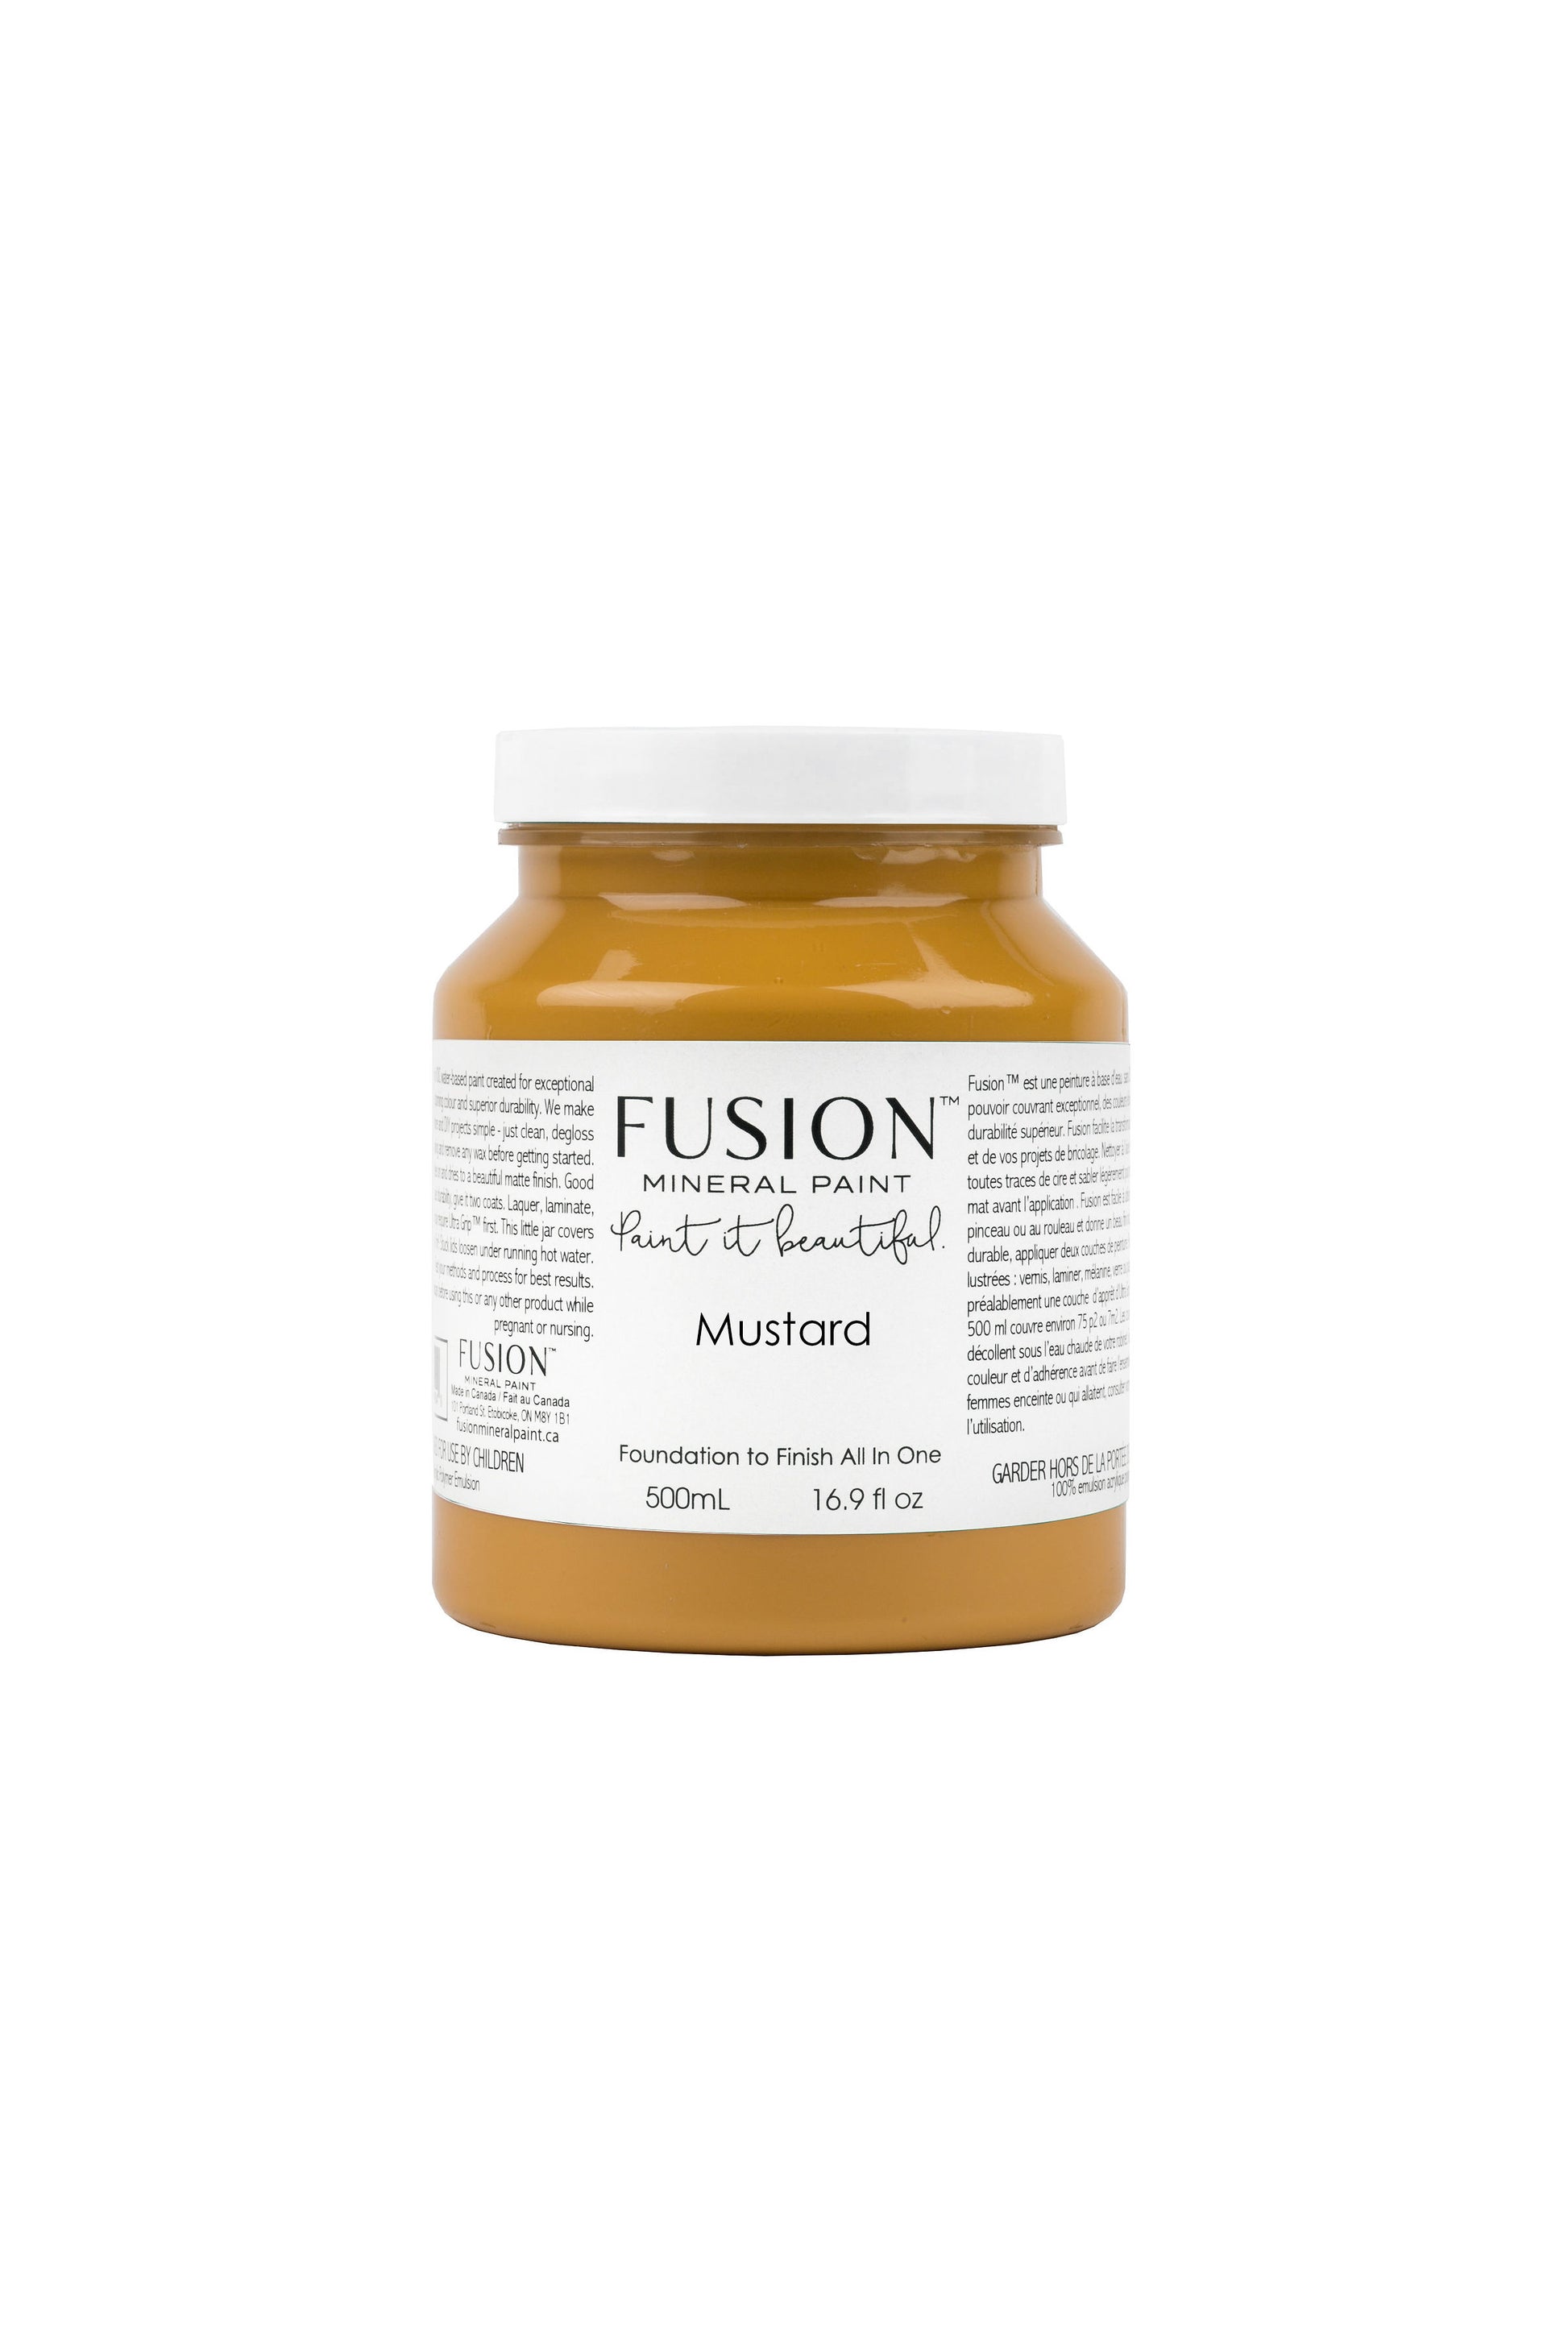 Mustard  Fusion Mineral Paint, Muted Yellow Paint Color| 500ml Pint Size